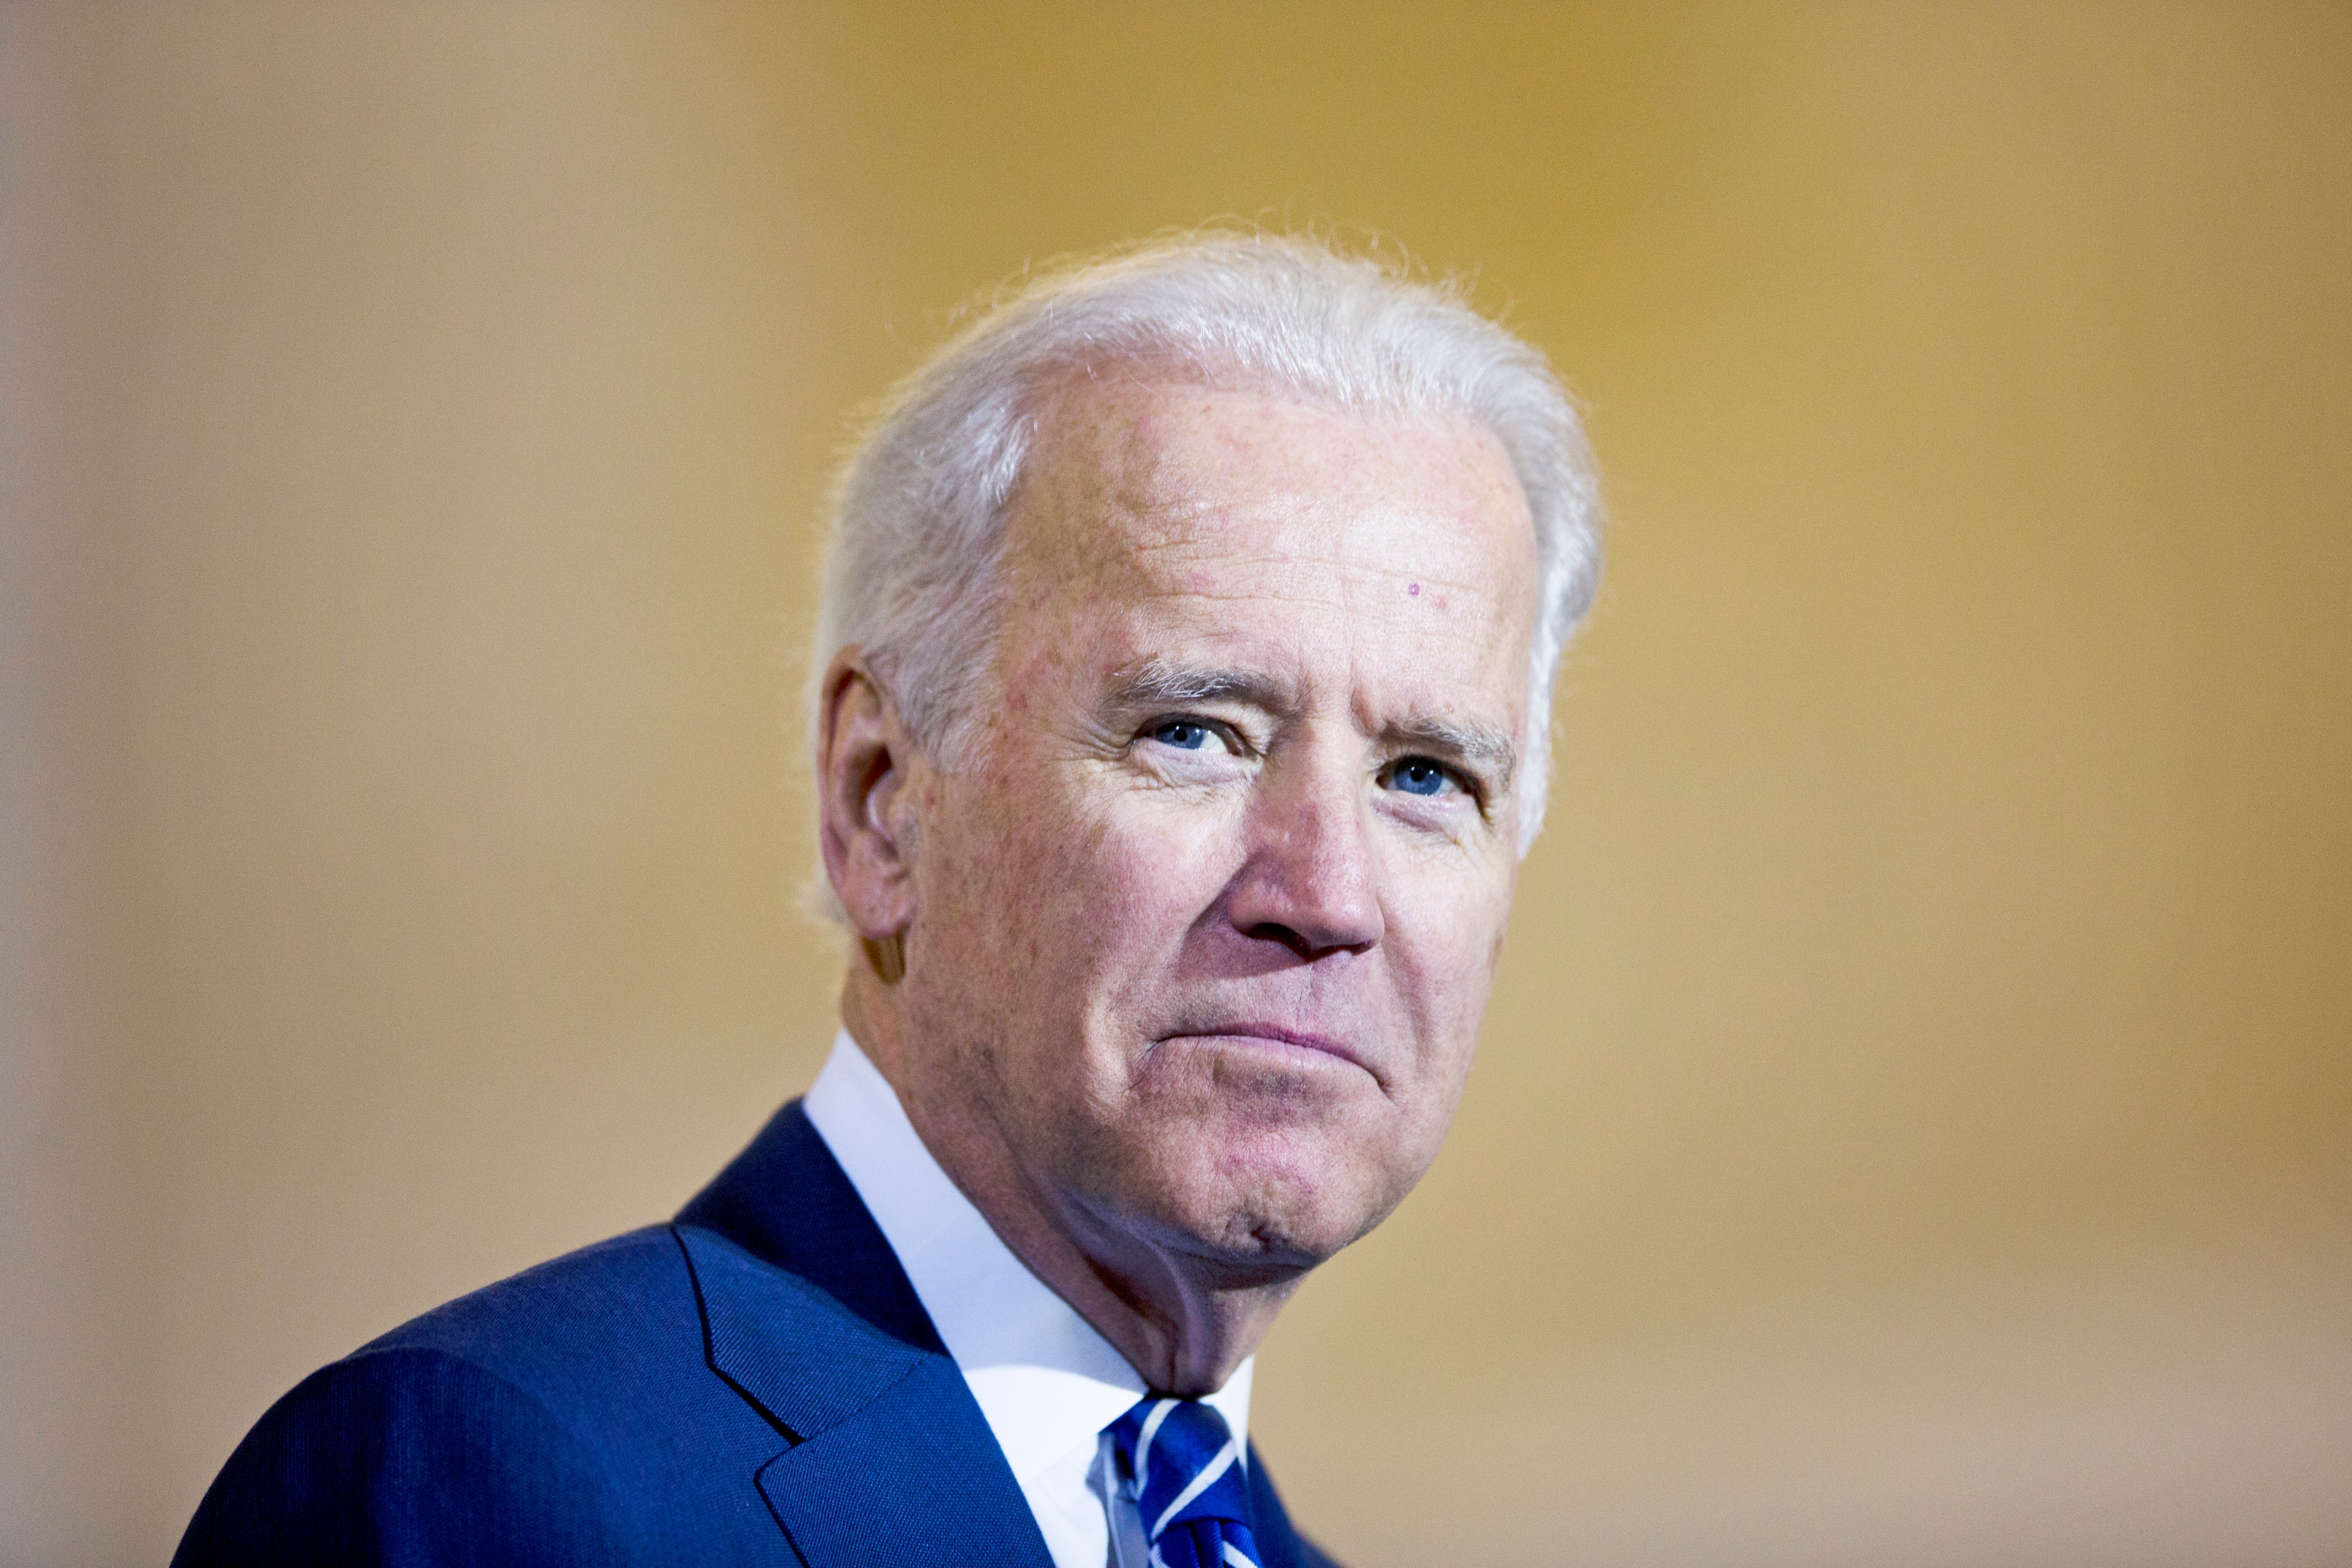 Vice President Joe Biden listens to remarks at a news conference on Feb. 6, 2014, at 30th Street Station in Philadelphia.